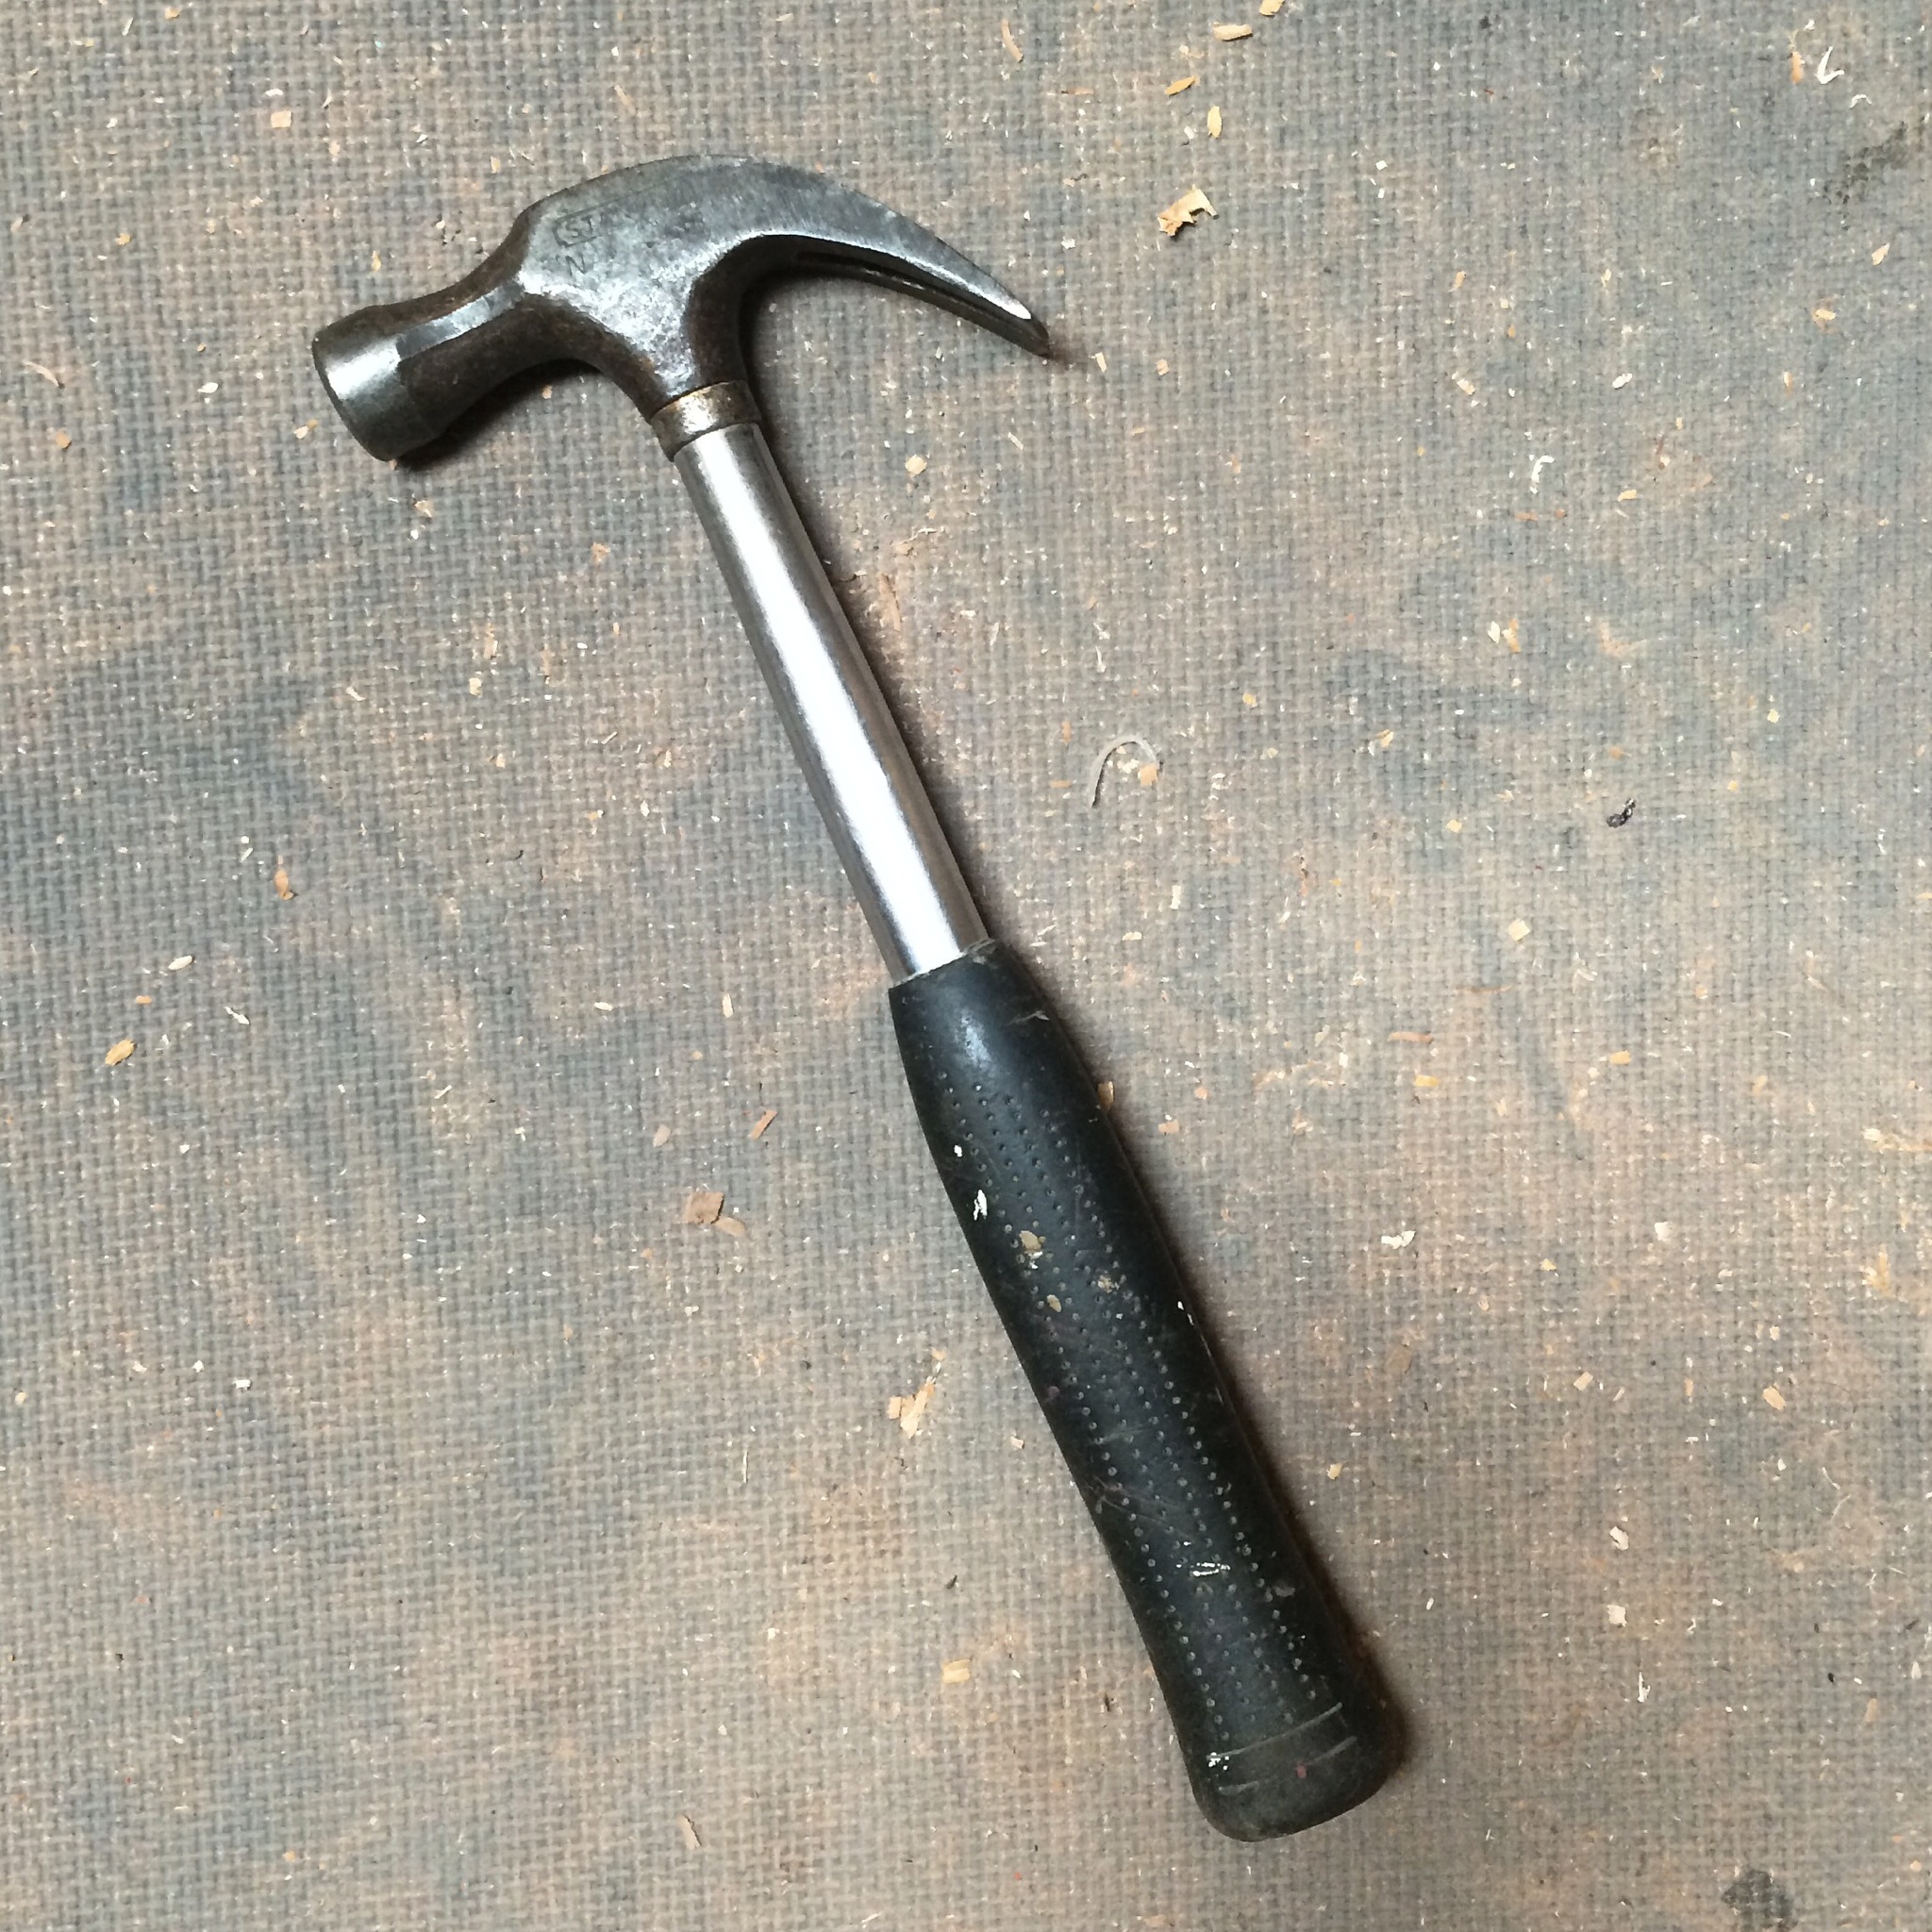 A hammer from Dad